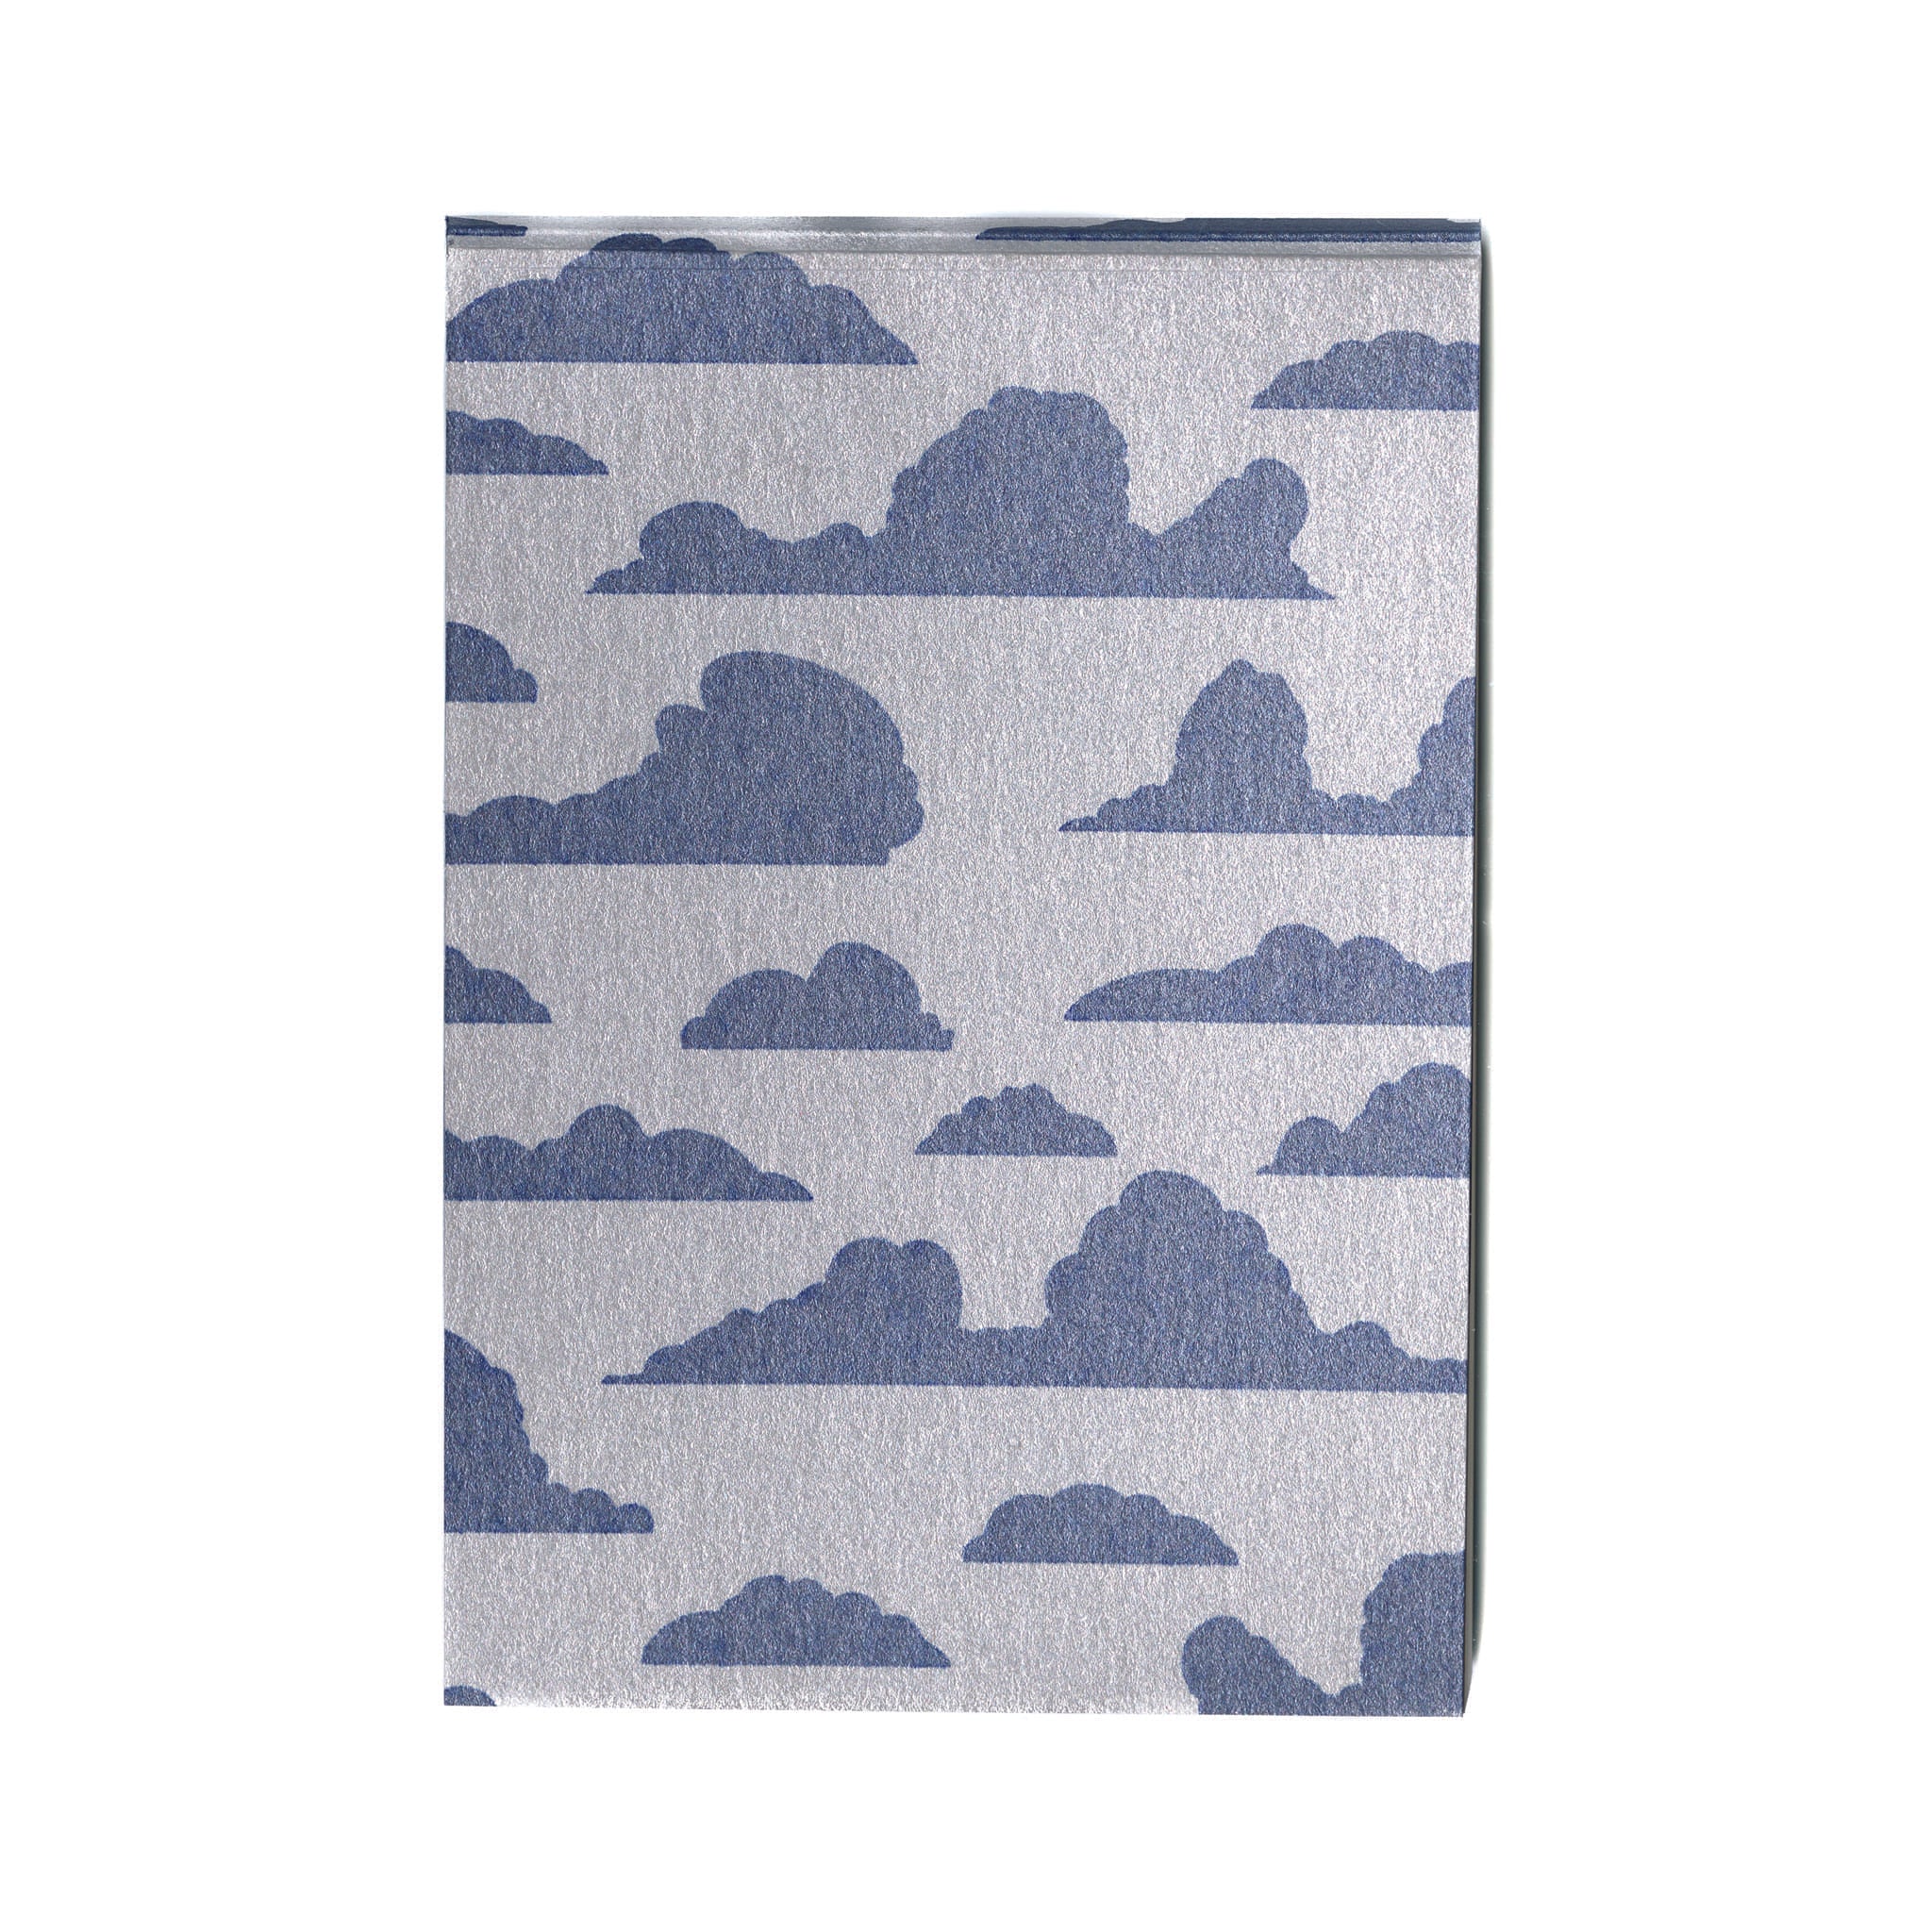 Pocket mini journal with original blue cloudy print cover and 100% cotton paper pages